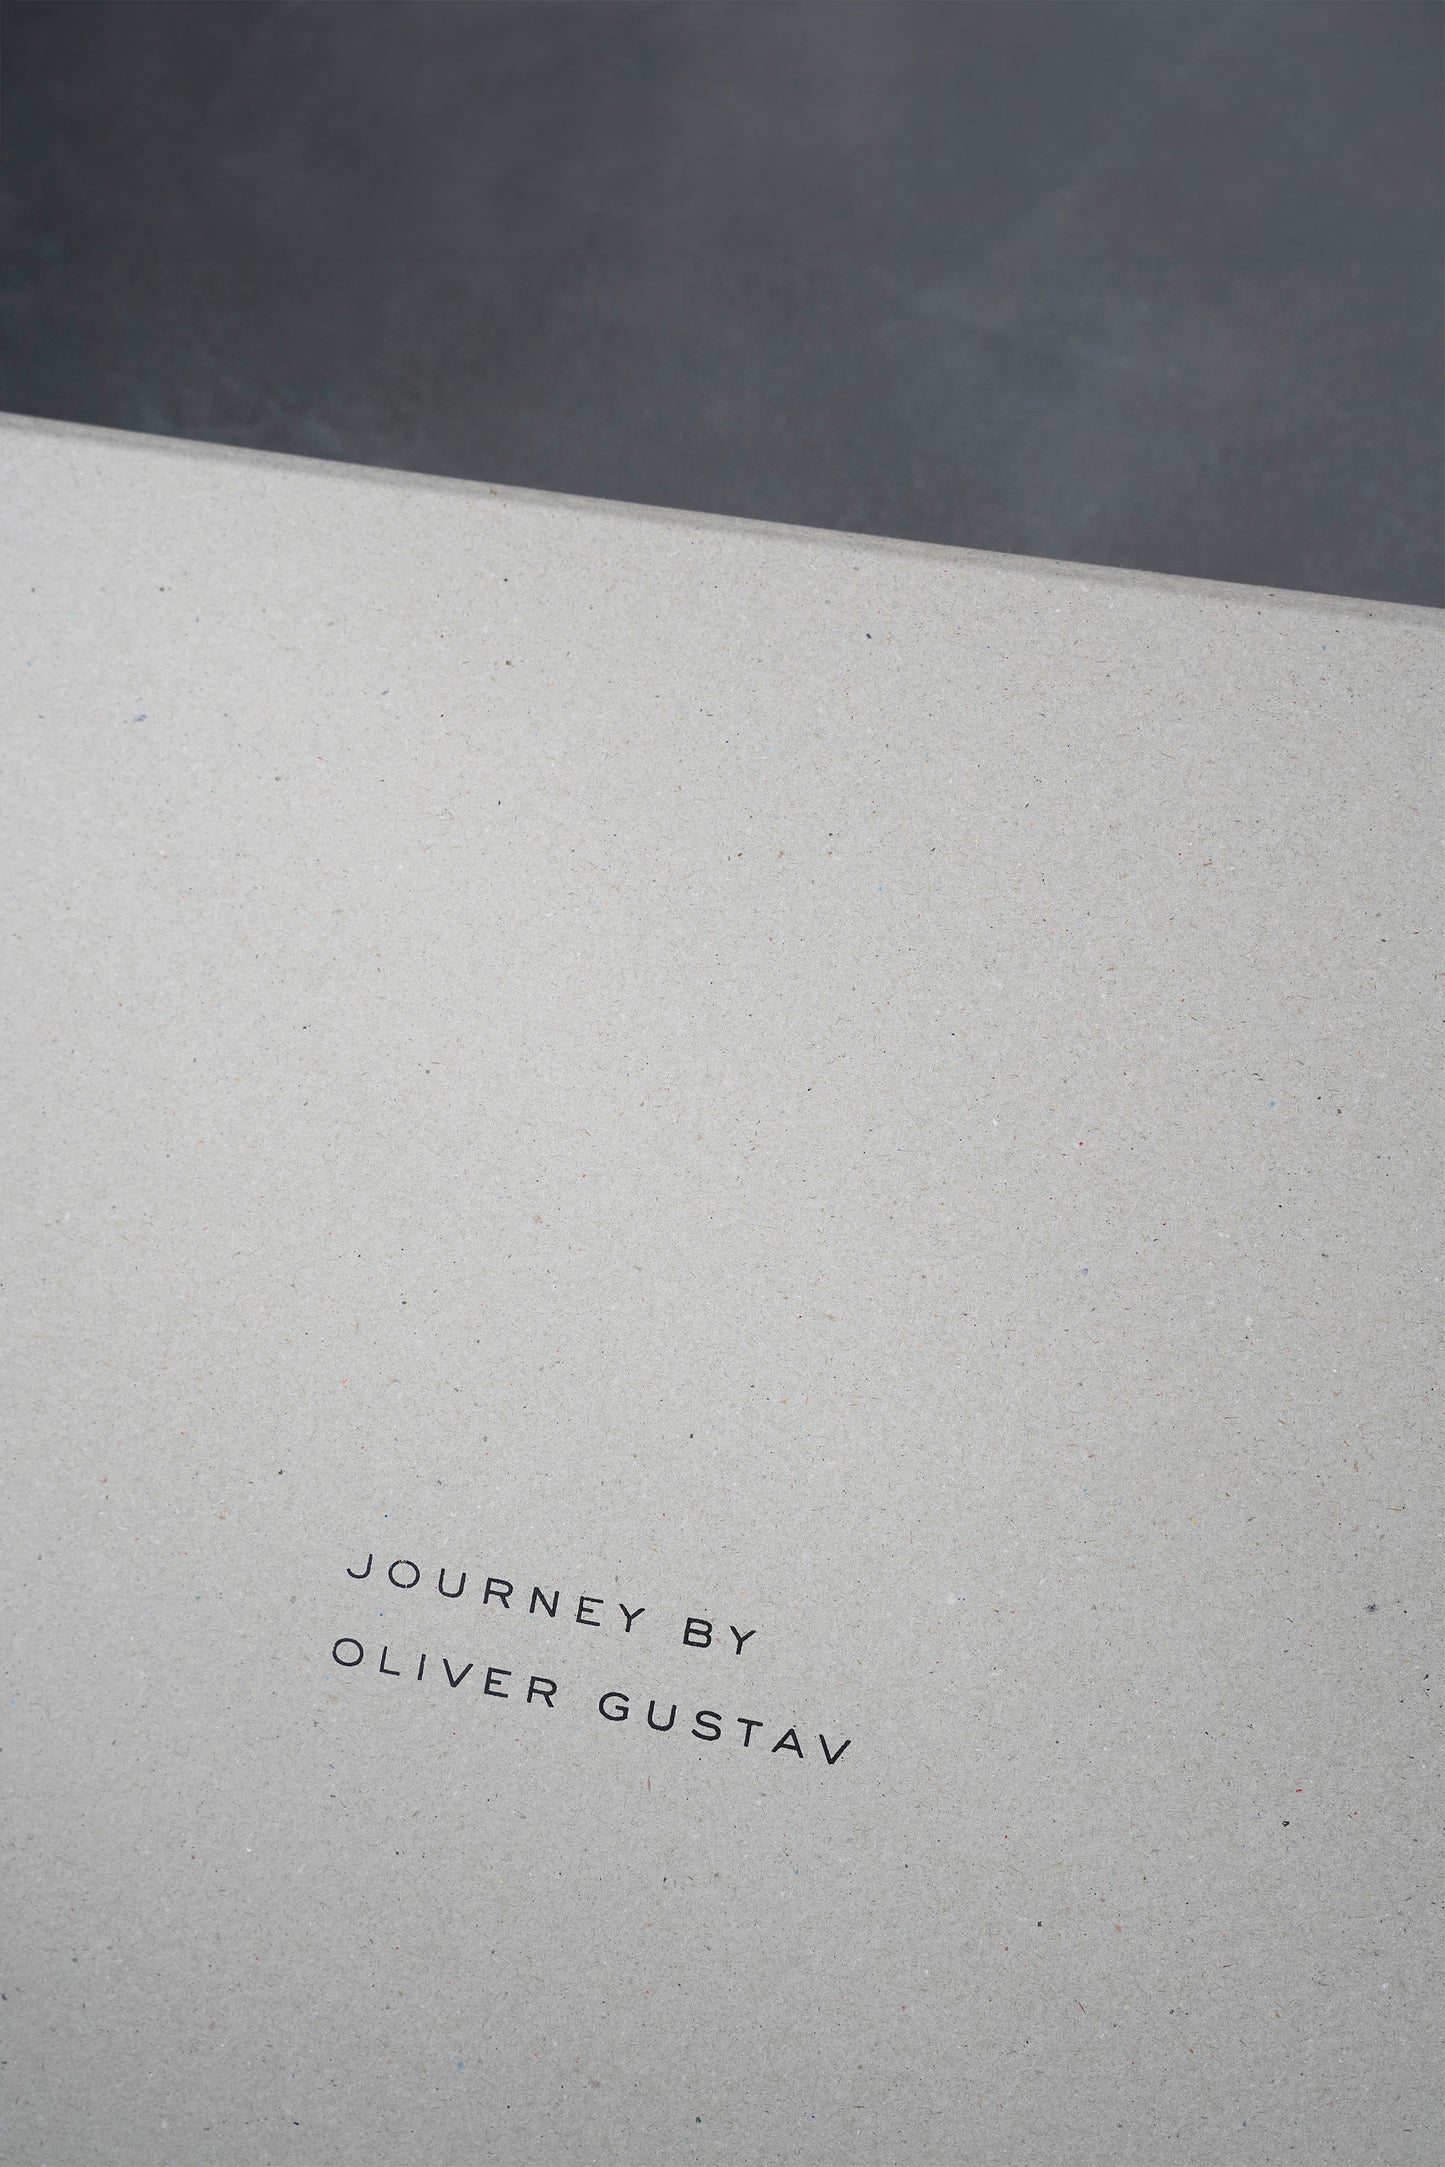 "ALUMINUM SIDE TABLE FROM JOURNEY" BY OLIVER GUSTAV